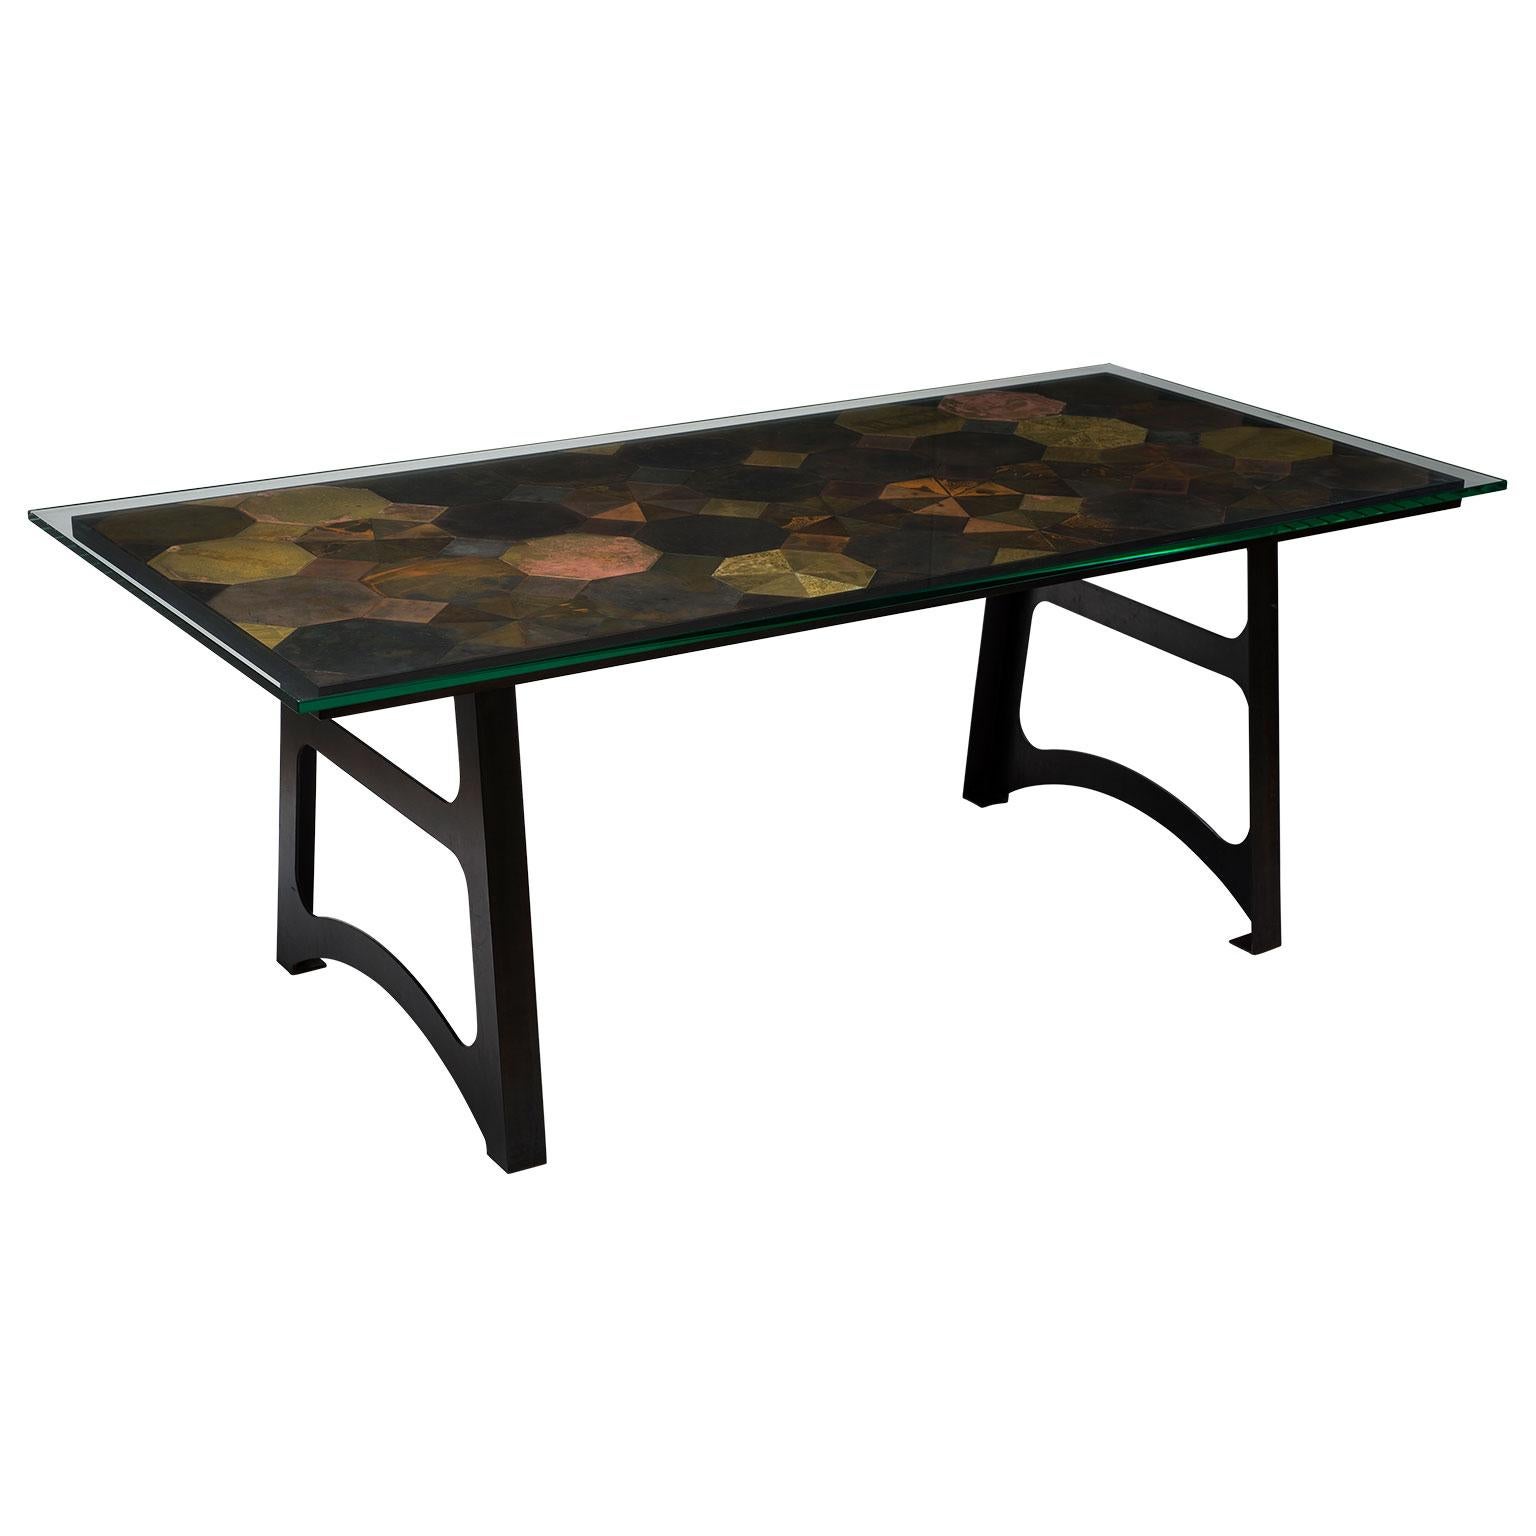 This unique Mosaic dining table with brass and steel tiles pays homage to a traditional Italian floor.

Made up of 141 individually patinated mild-steel and brass tiles, this unique table top blends a fusion of industrial colors and textures. This